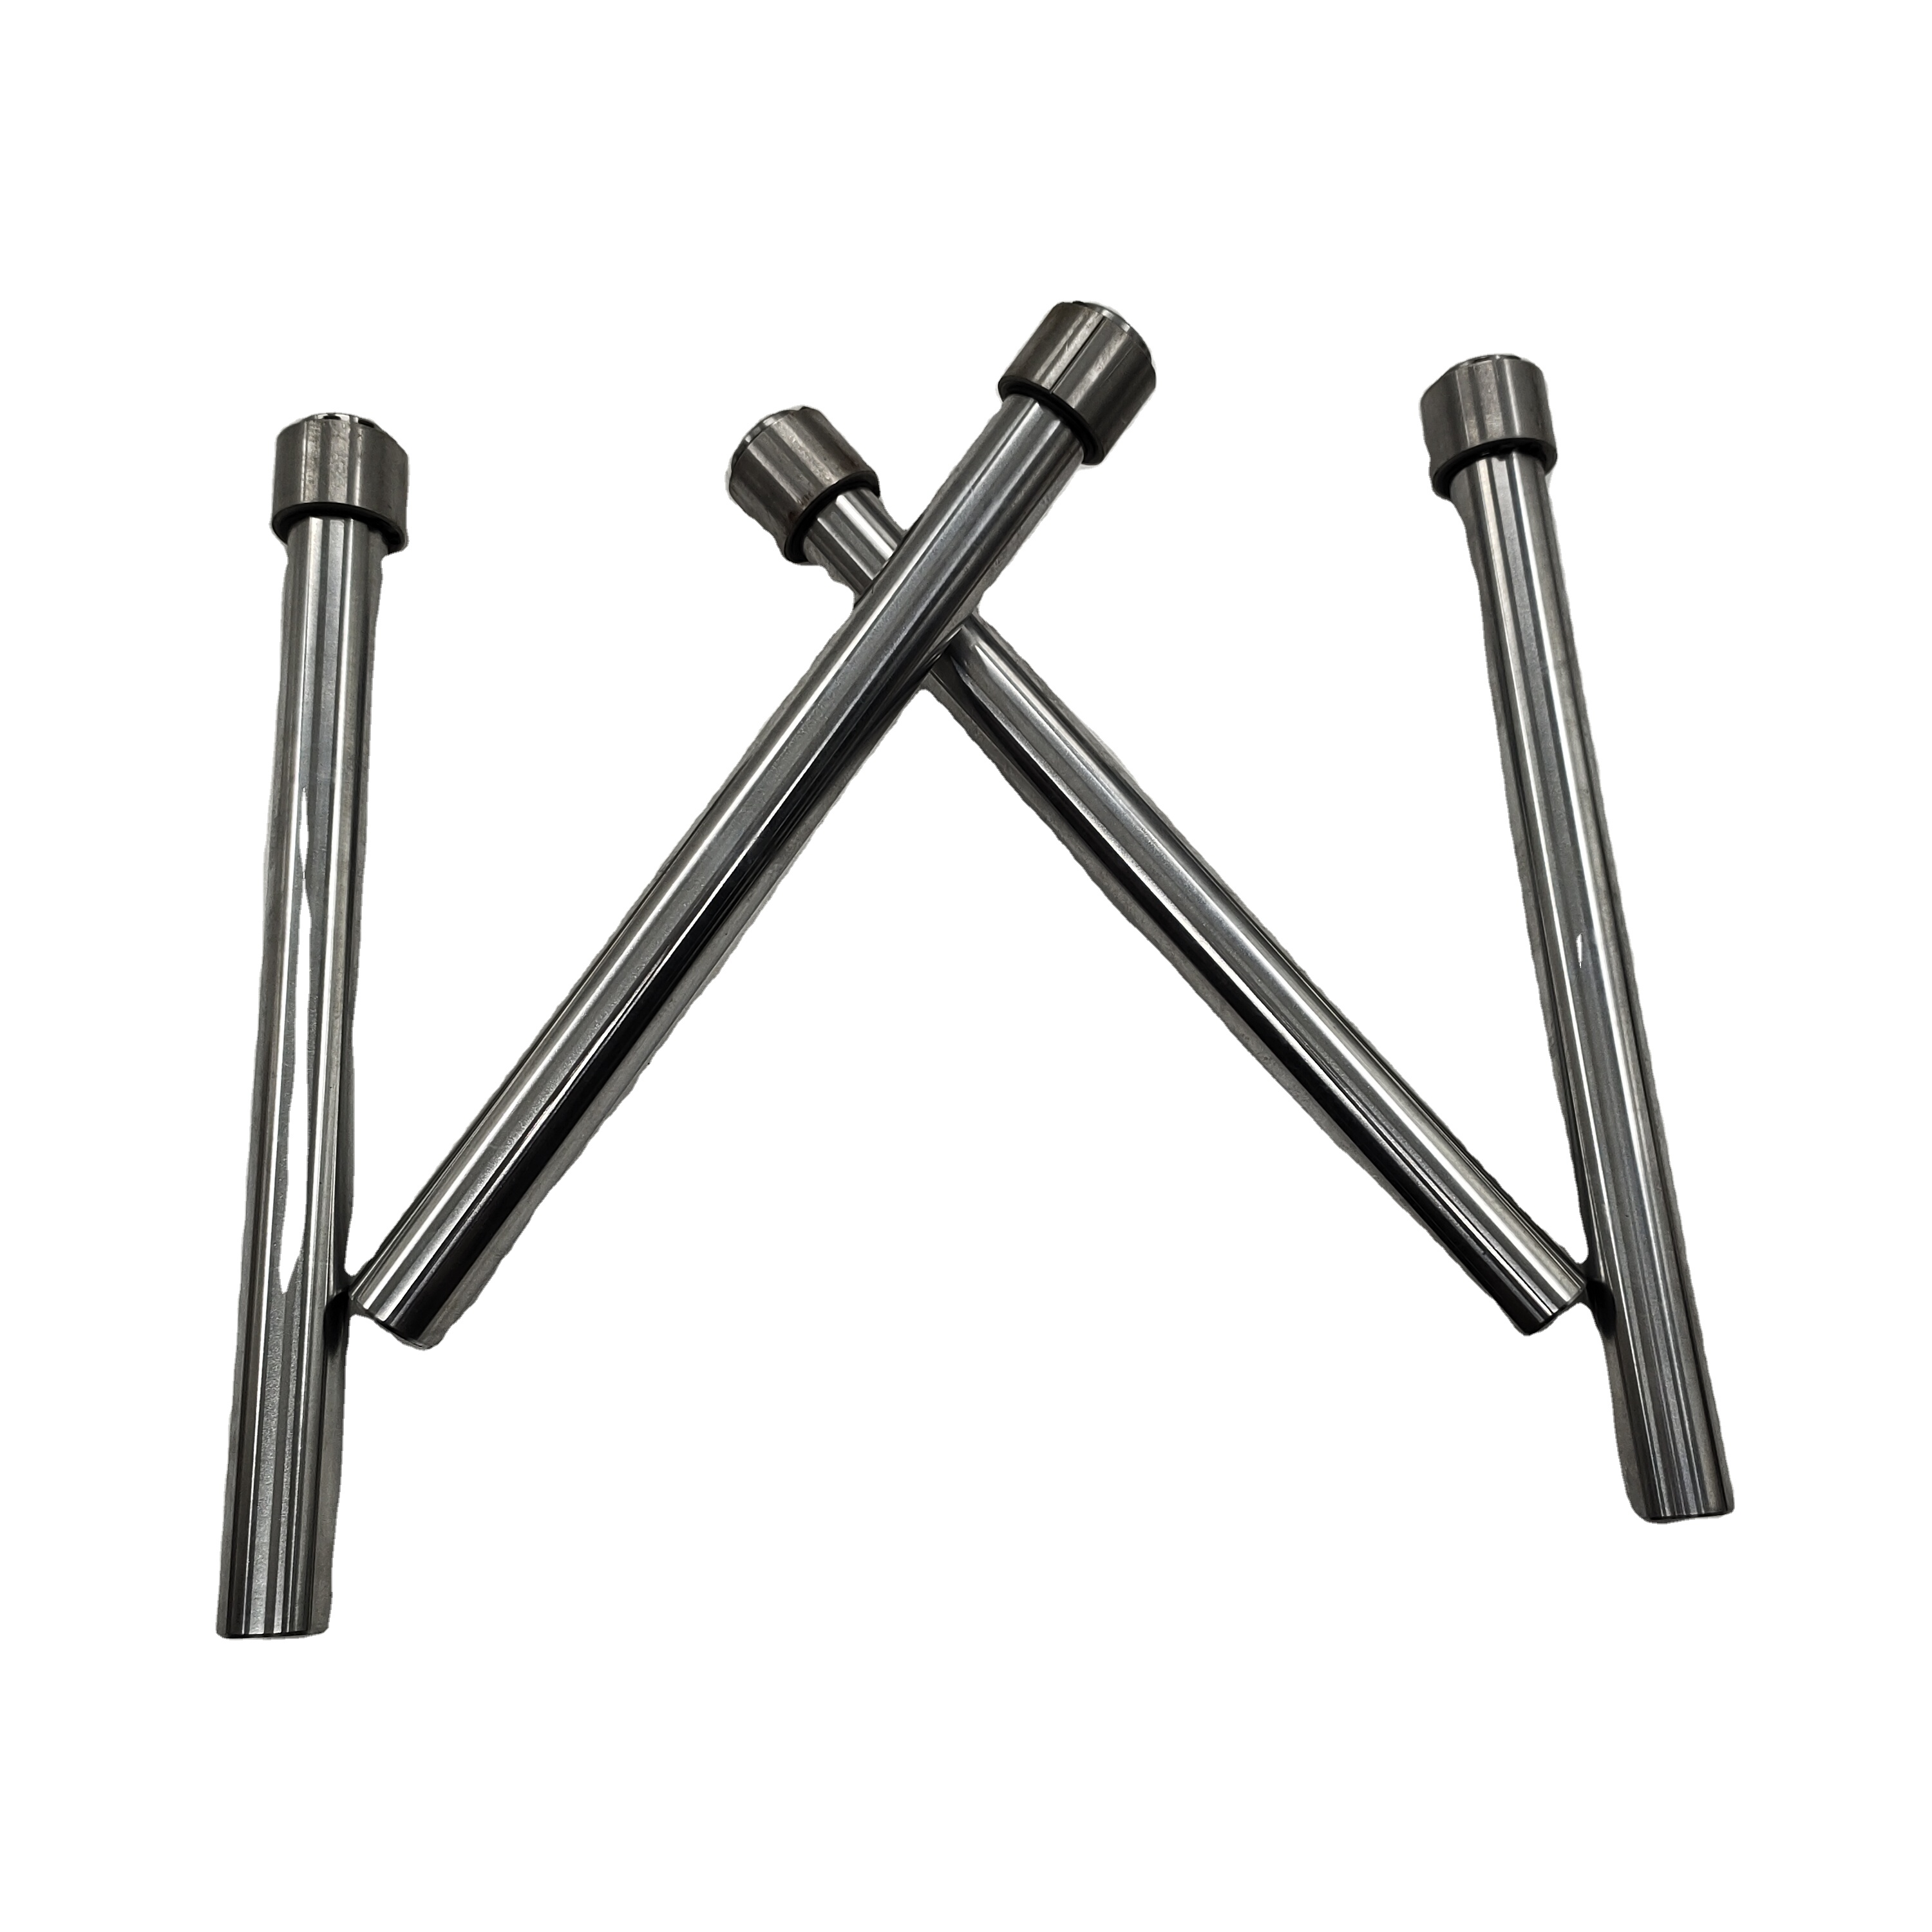 DAYANG factory genuine parts tricycle 09 double spring hydraulic shock absorber parts front fork pipe piston rod steel pipe